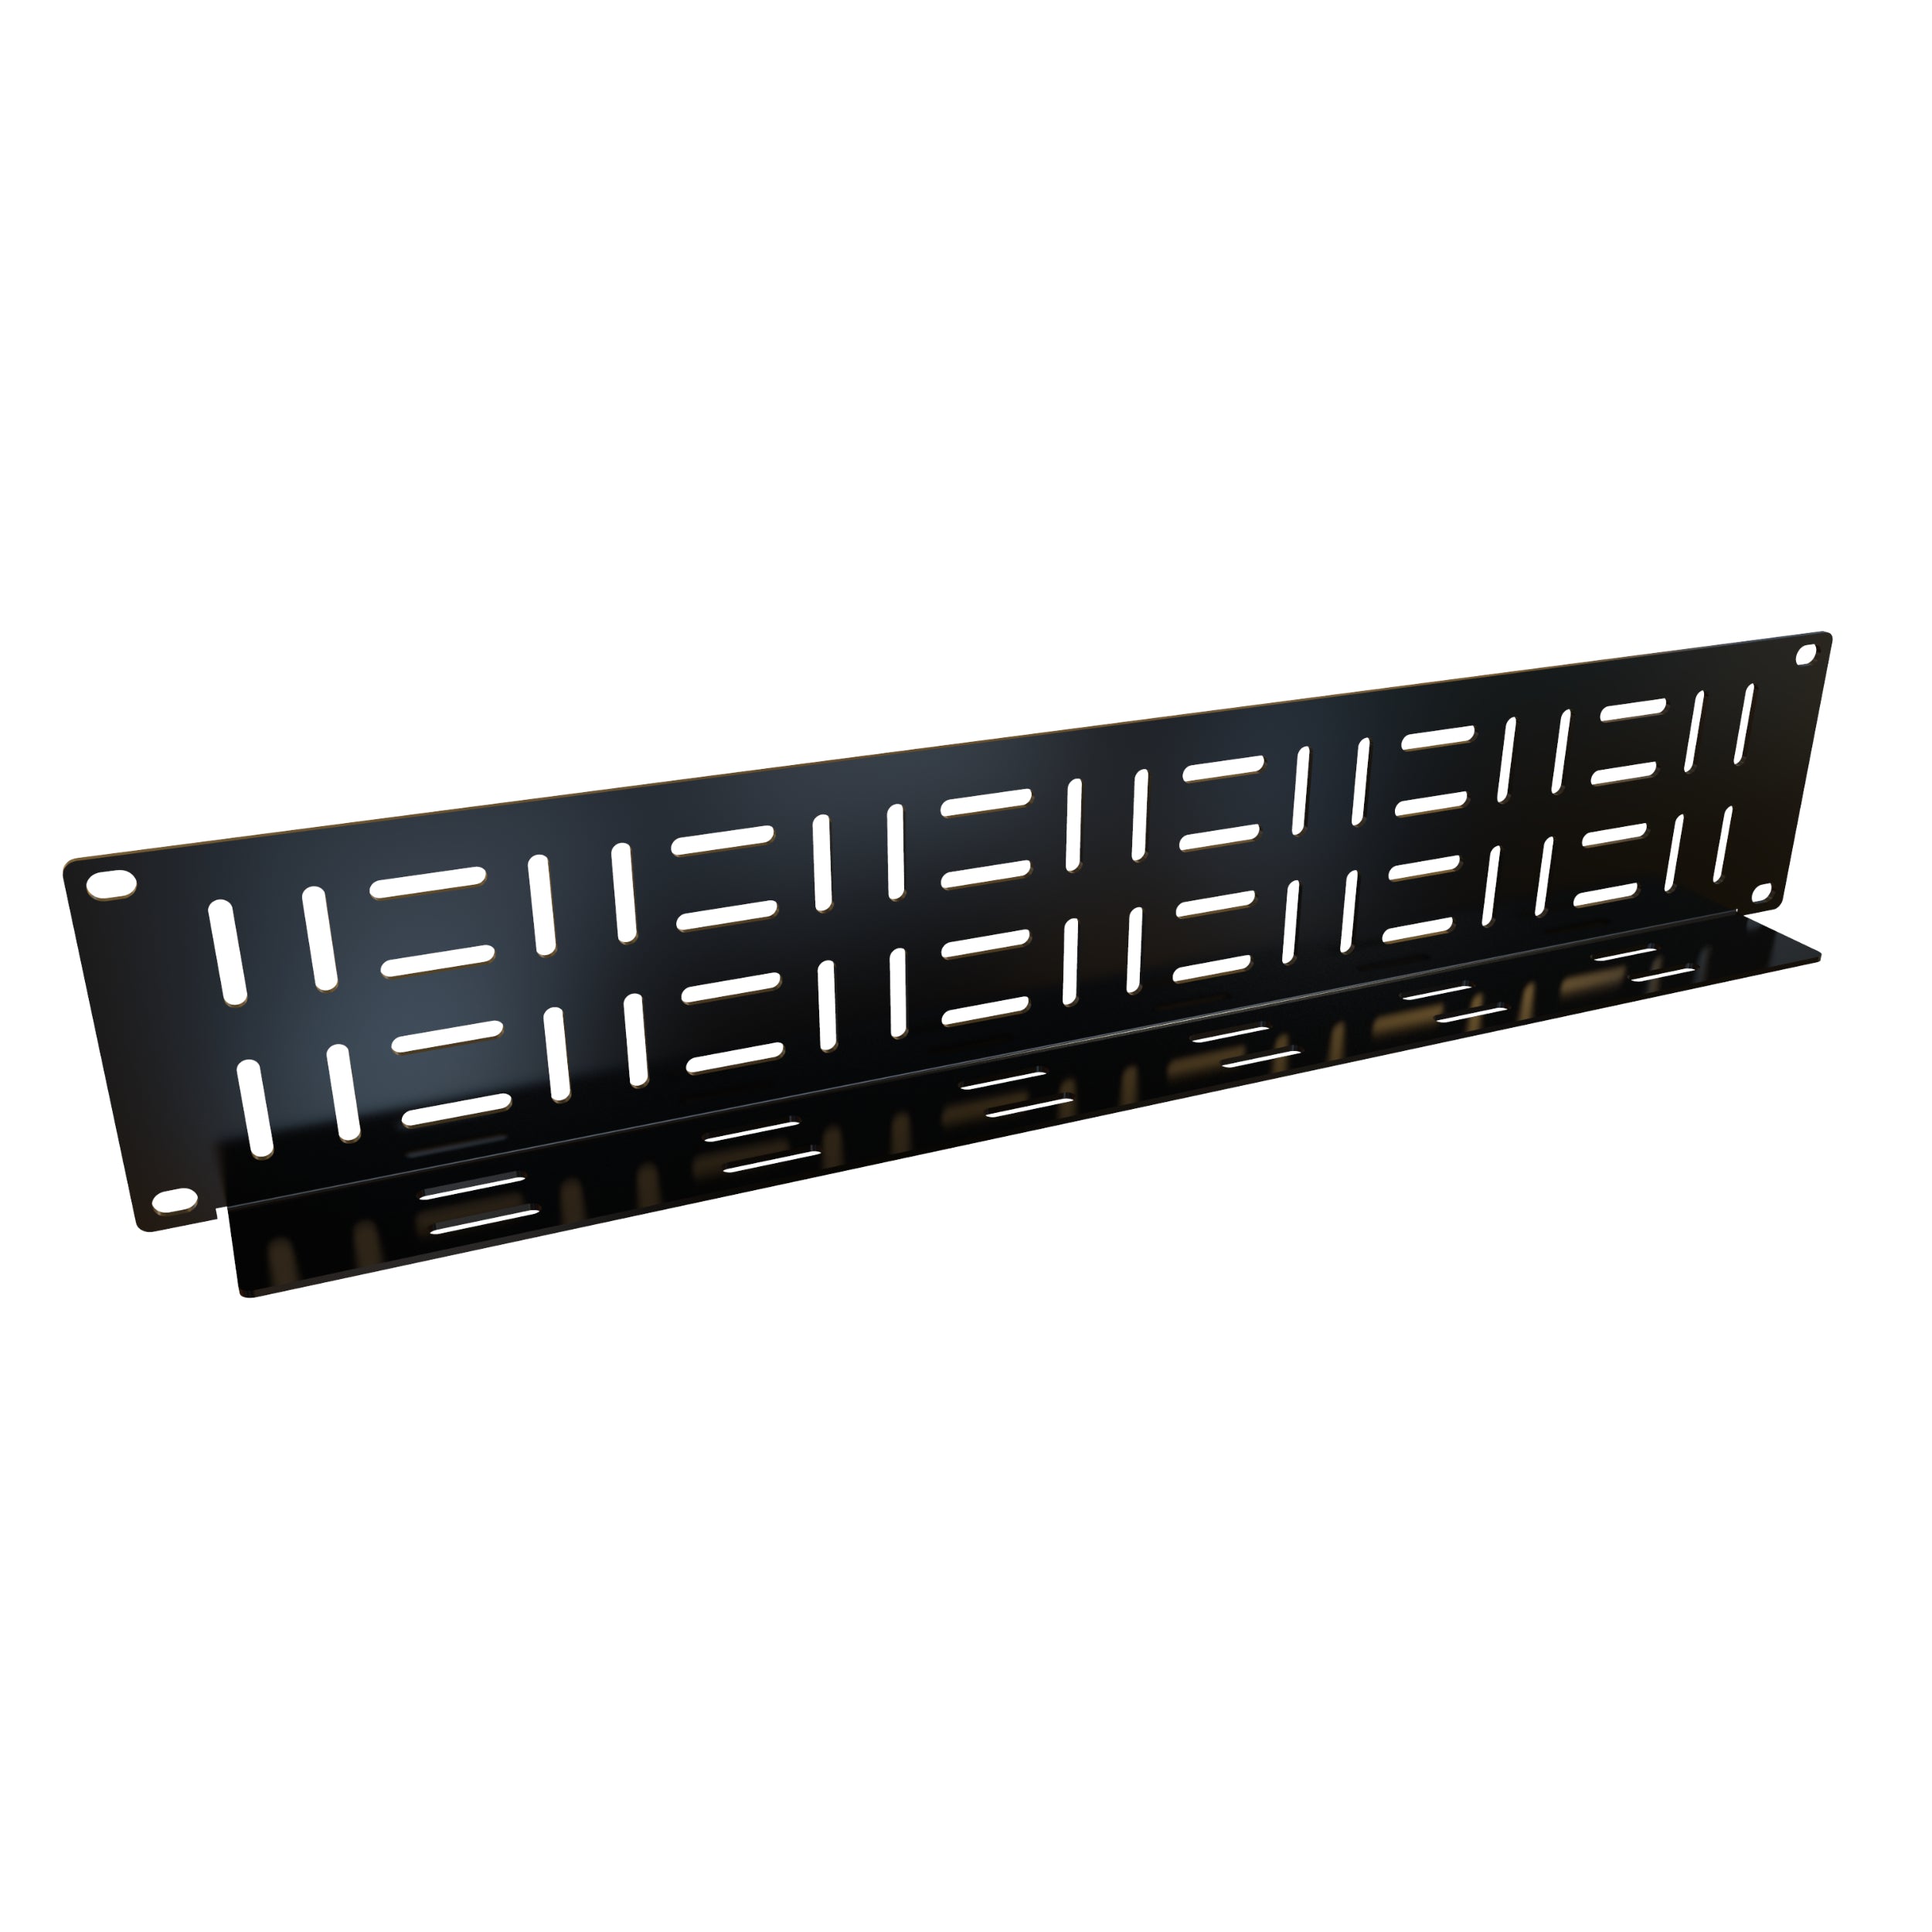 Horizontal Cable Manager Panel HCMP Series